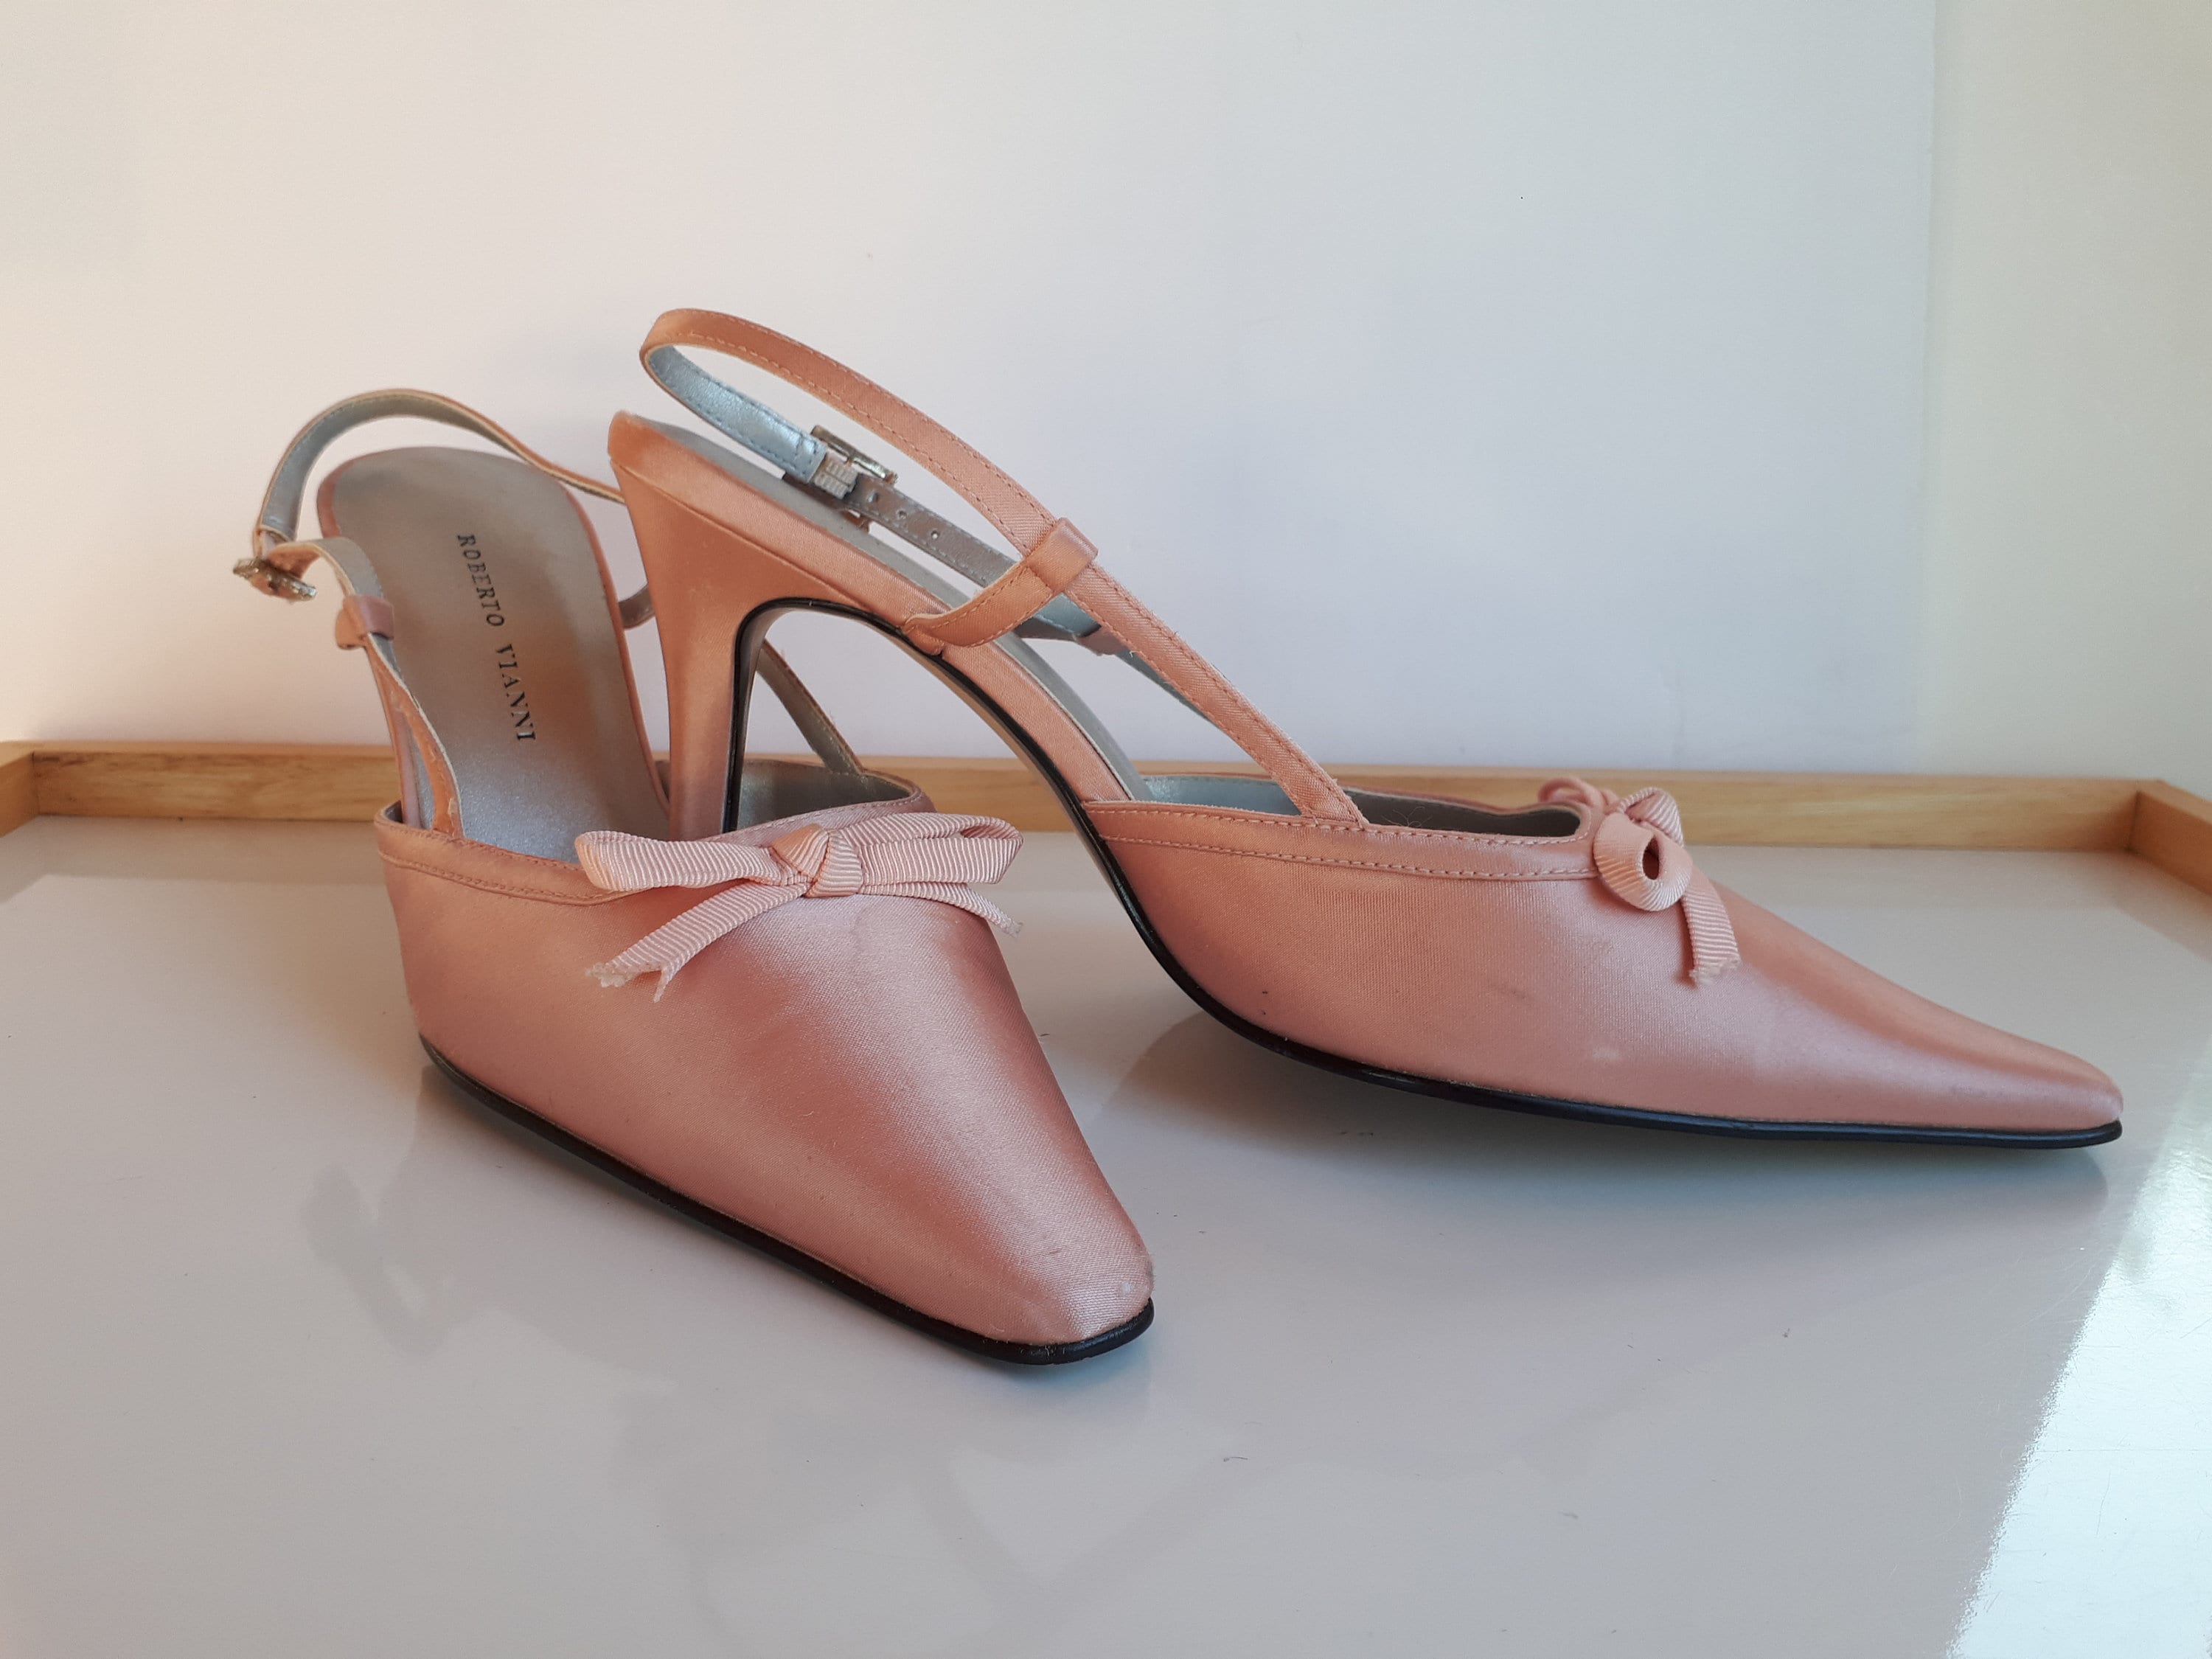 ROBERTO VIANNI pink satin women slingback shoes with front bow | Etsy